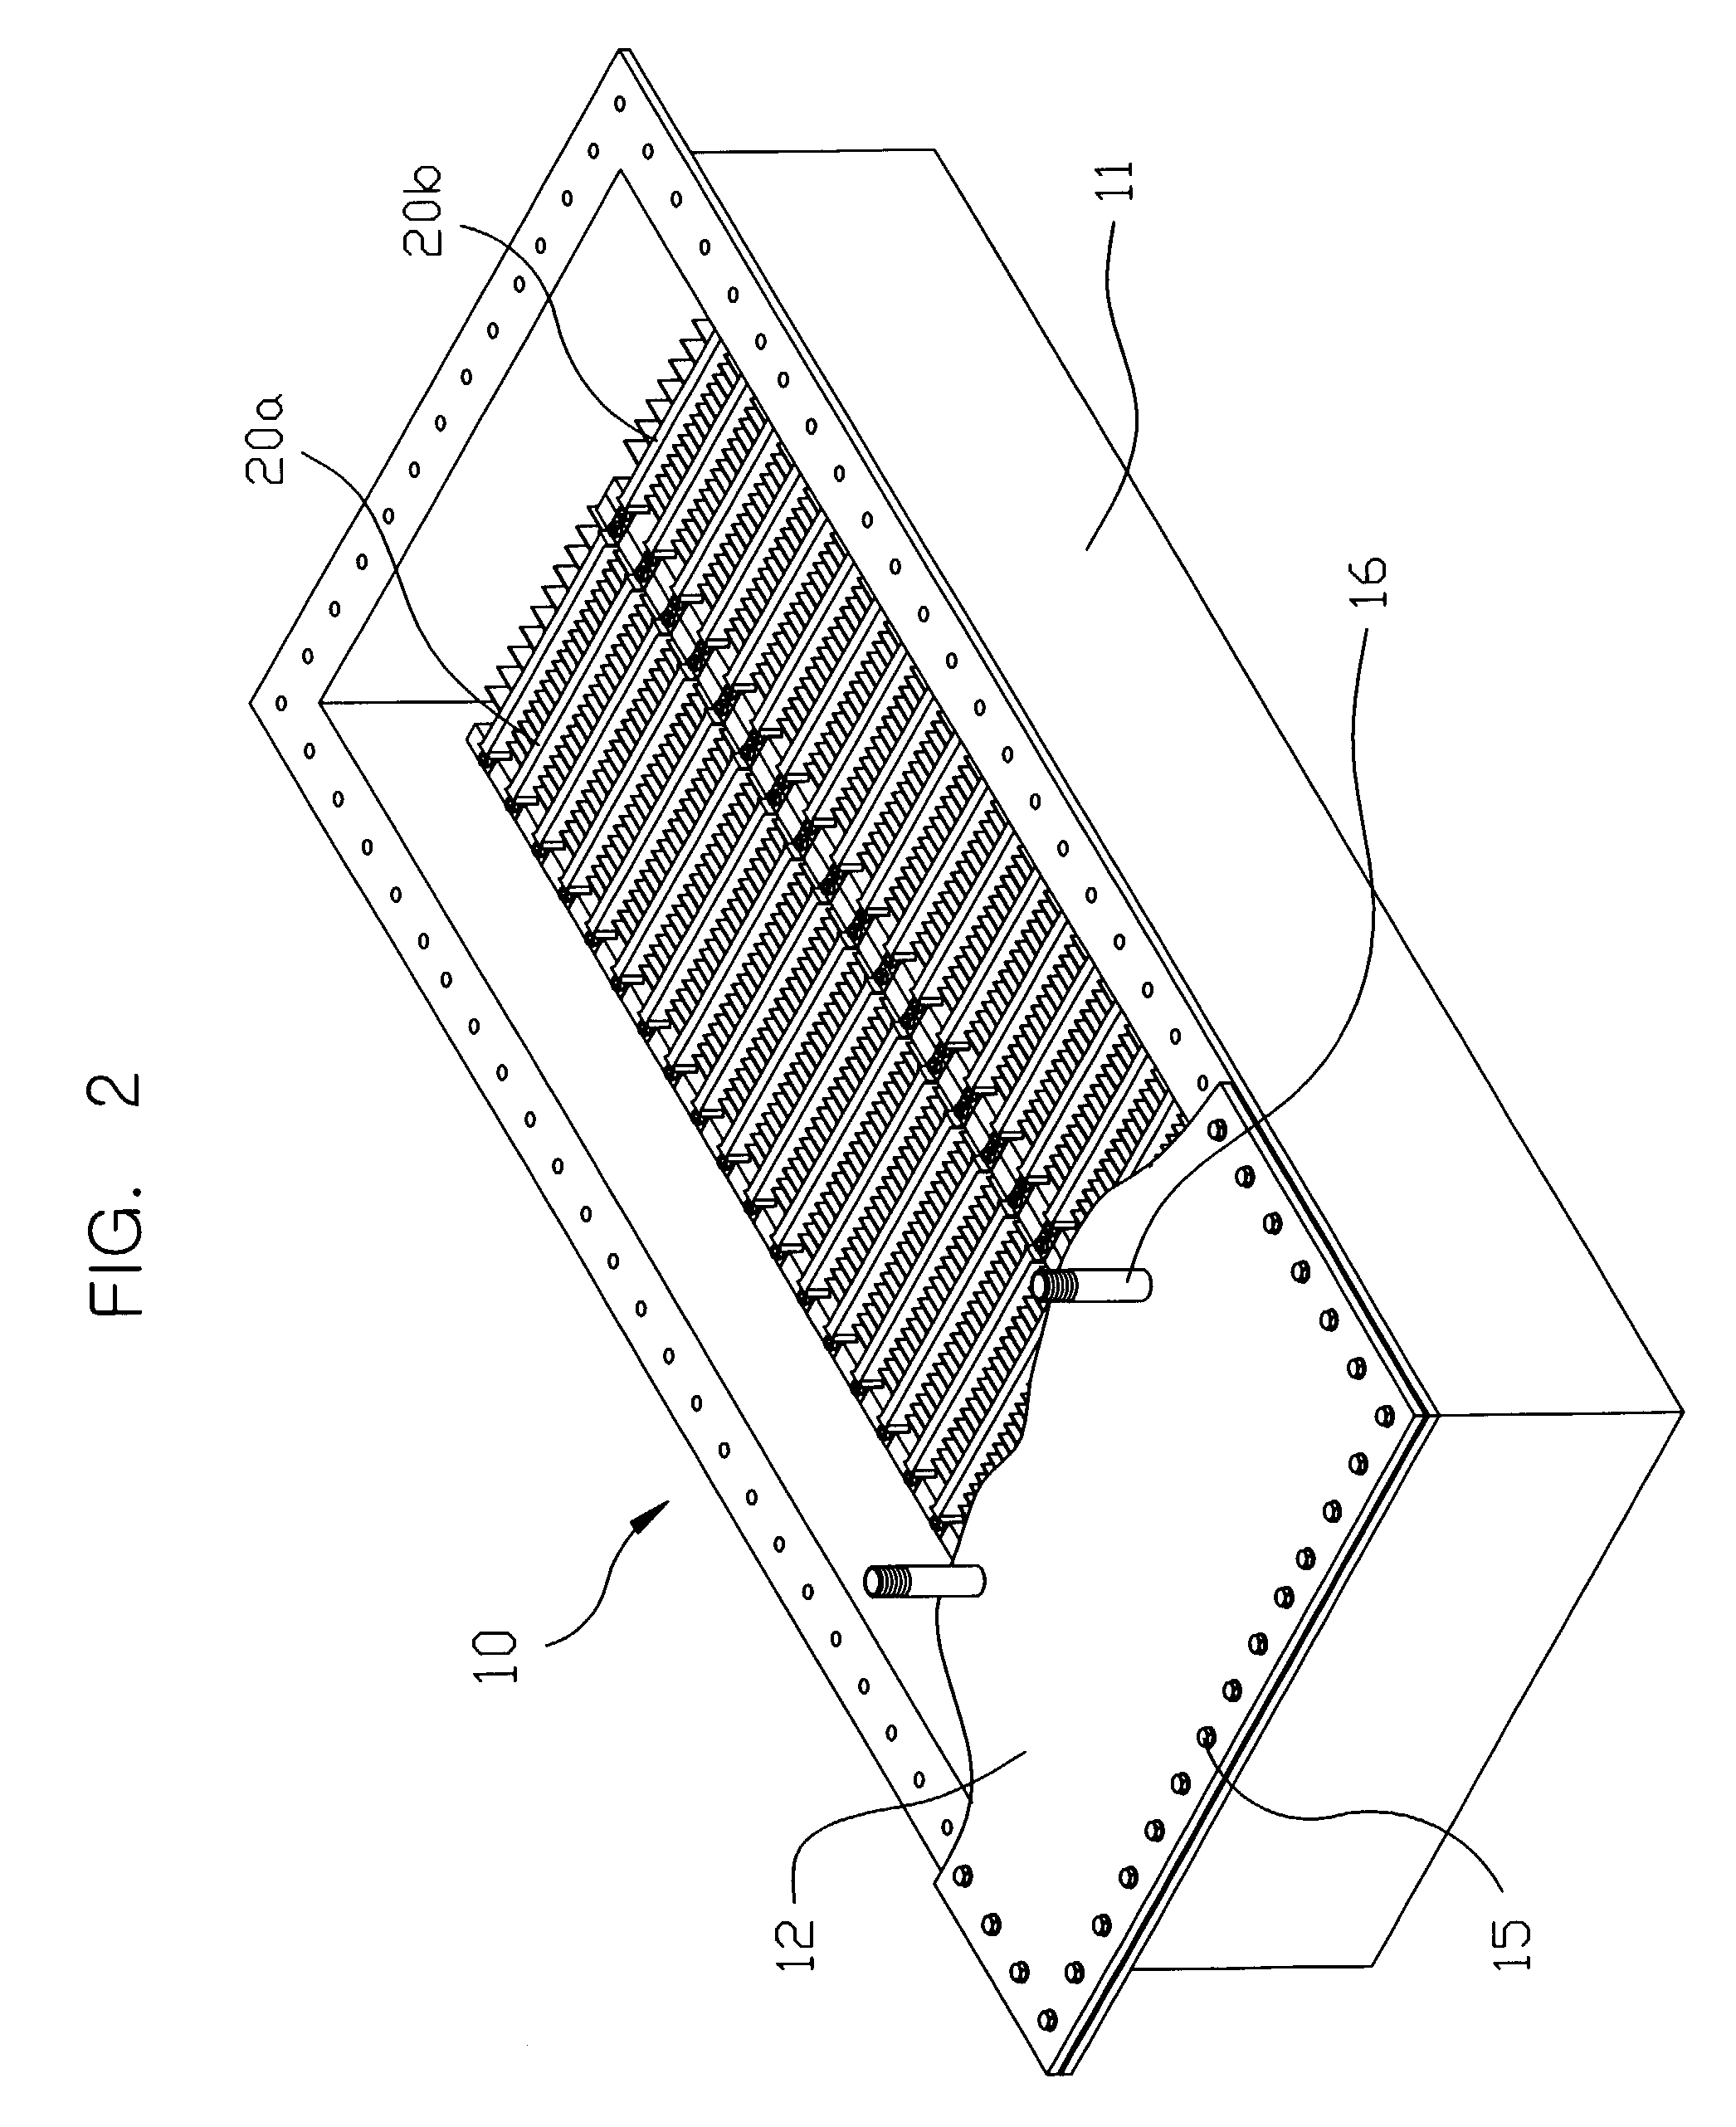 Brown gas mass production apparatus including a line style electrolytic cell